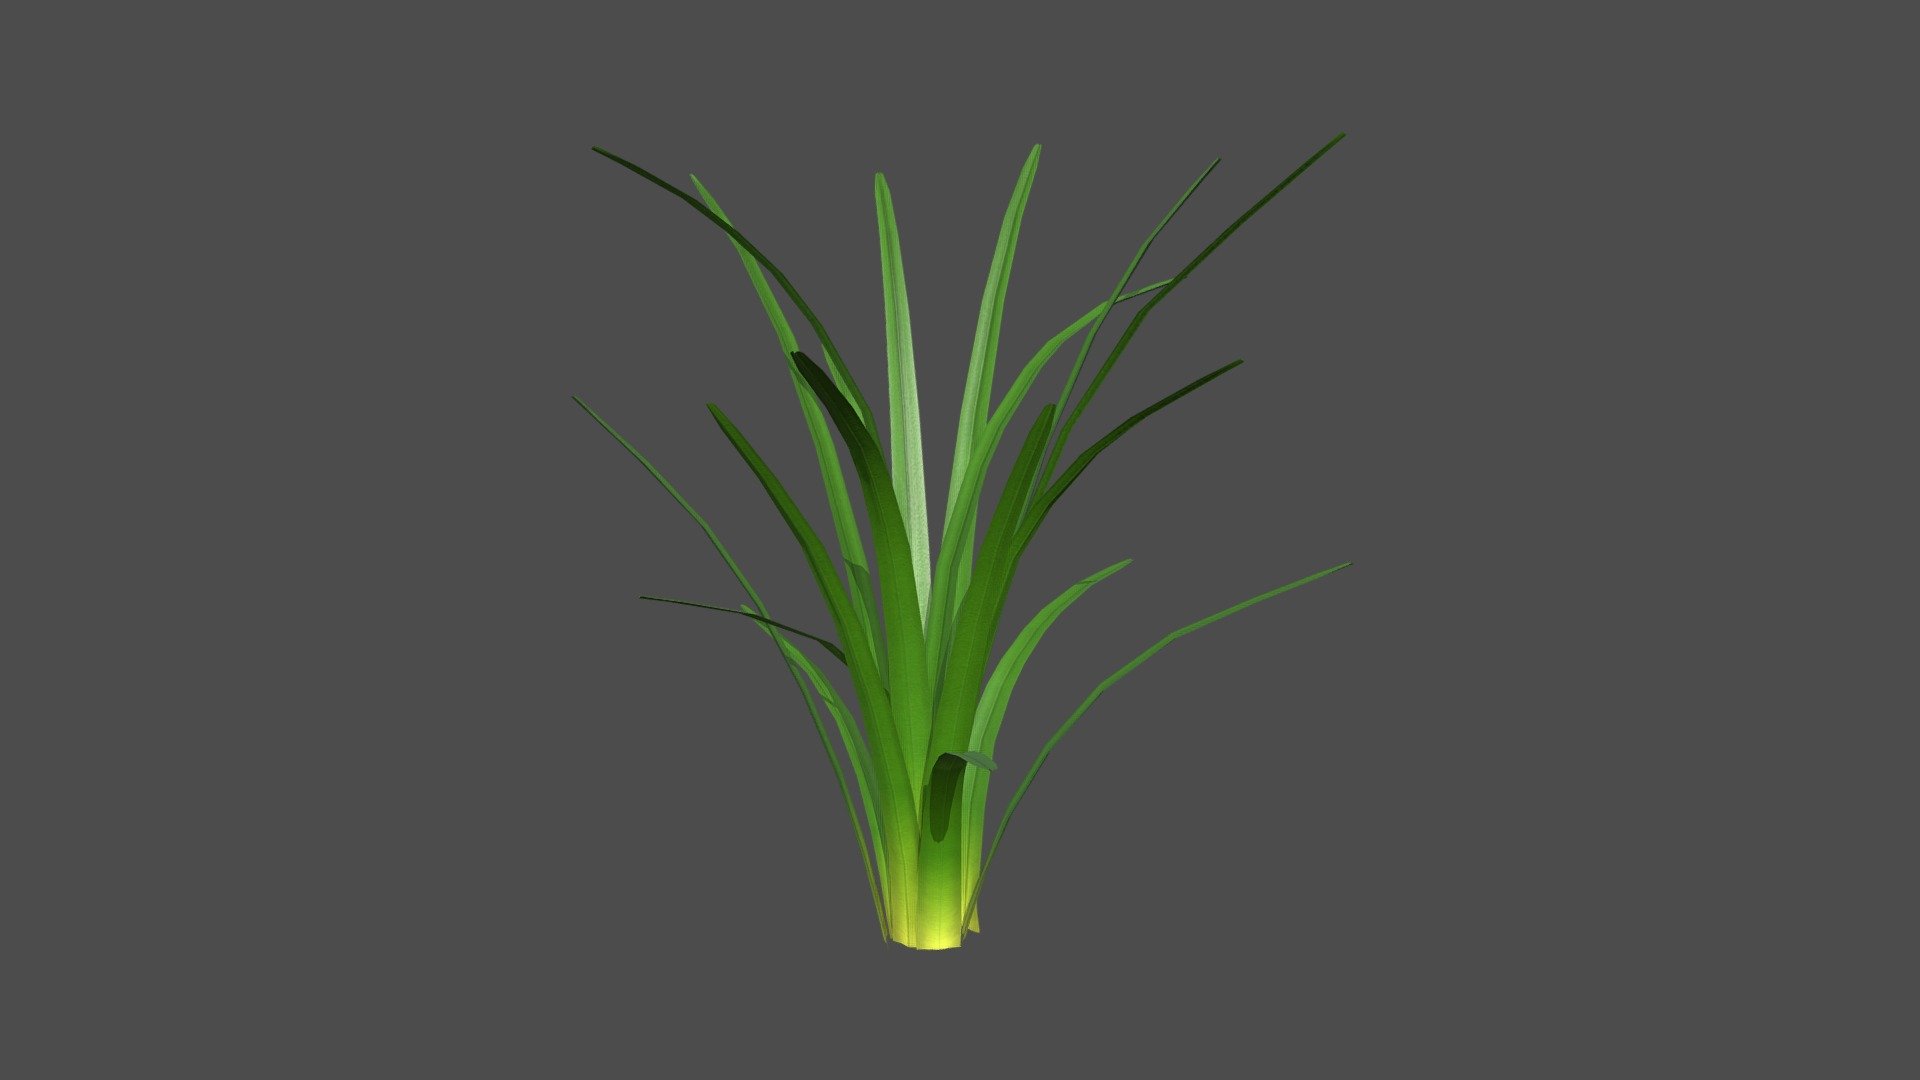 Low poly 3d model of a marine plant prop for sealife environments.

This model is part of an Underwater plant pack also for sale - Marine plant - Download Free 3D model by assetfactory 3d model